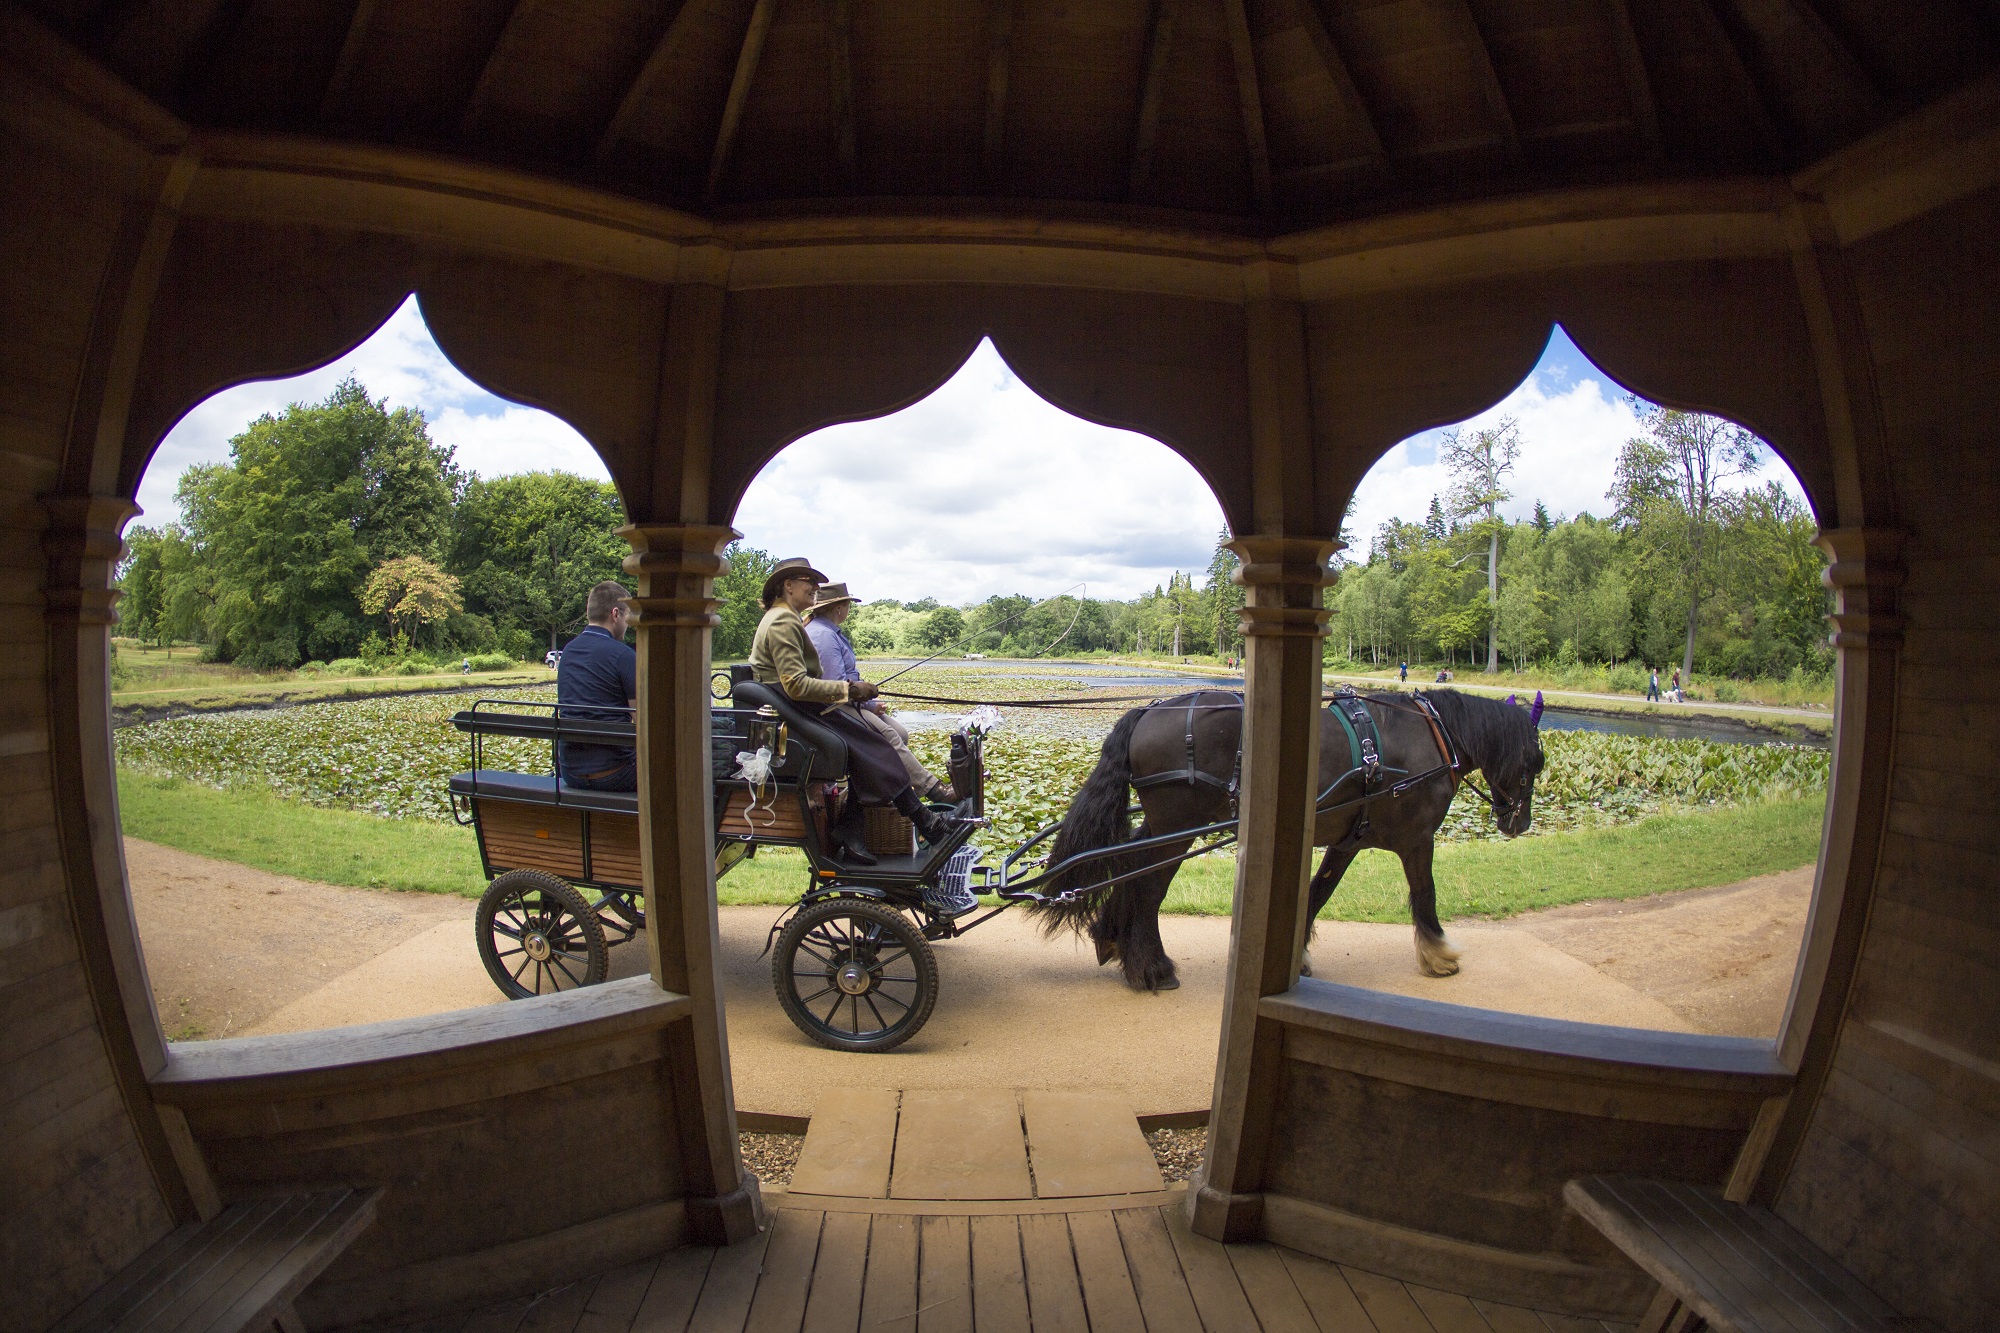 A horse drawn carriage passes the Cow Pond.